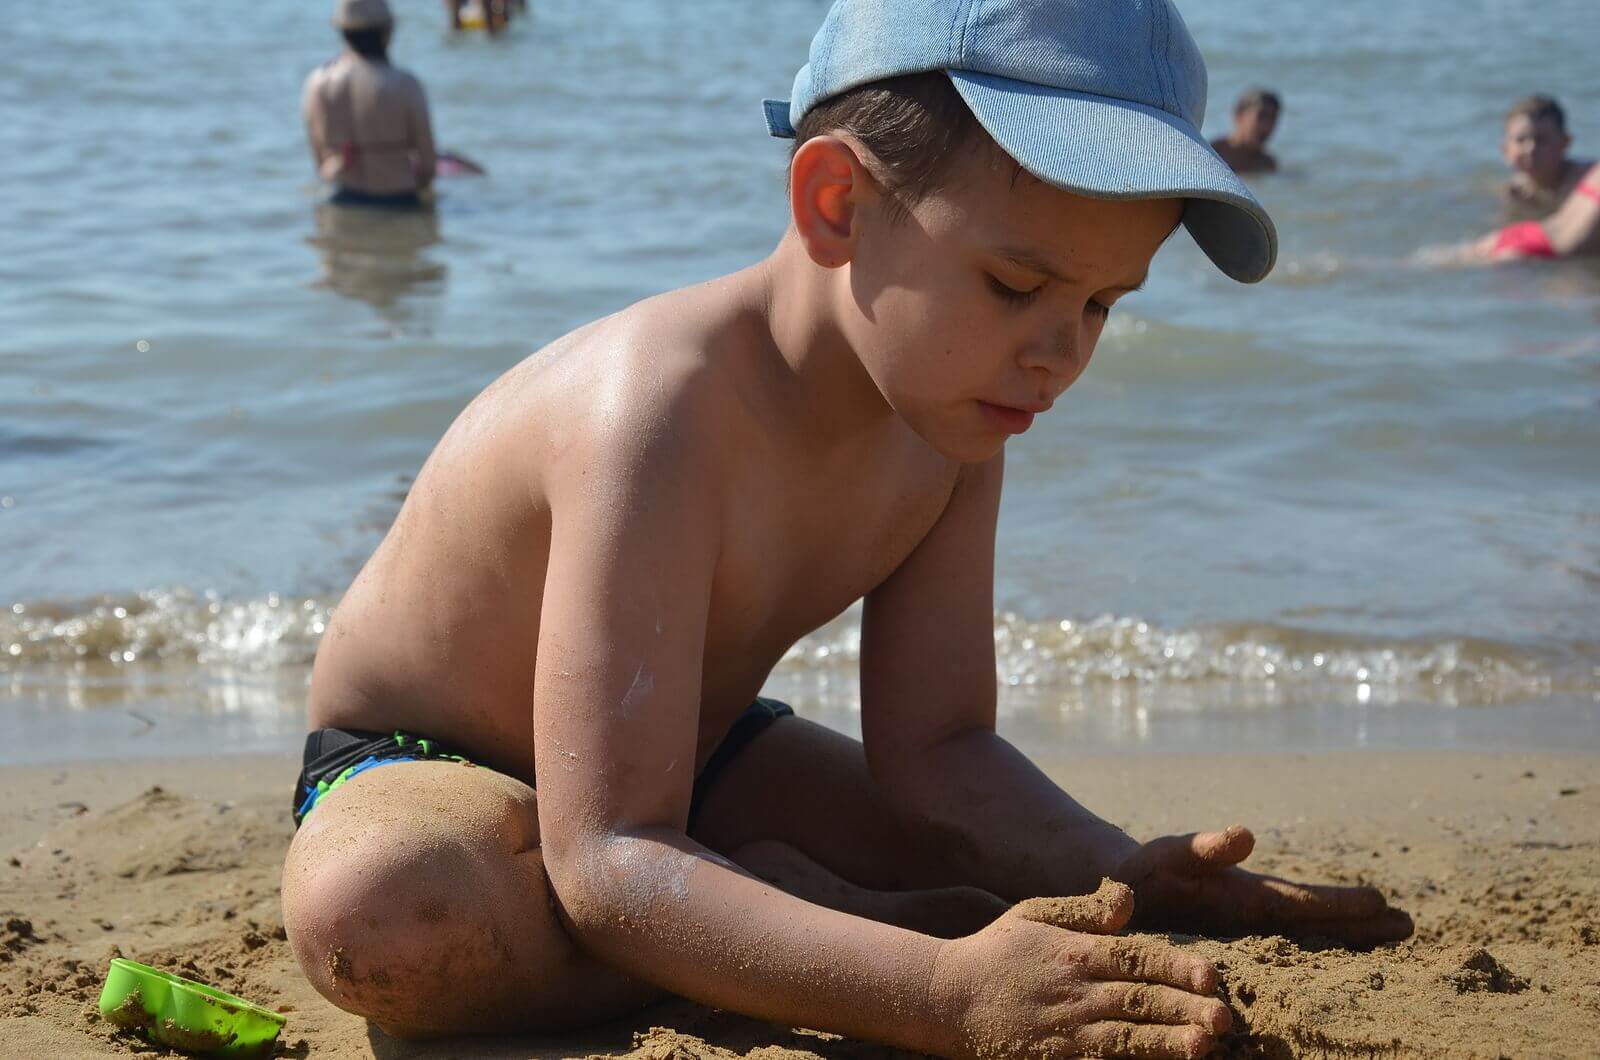 A child playing in the sand at the beach.